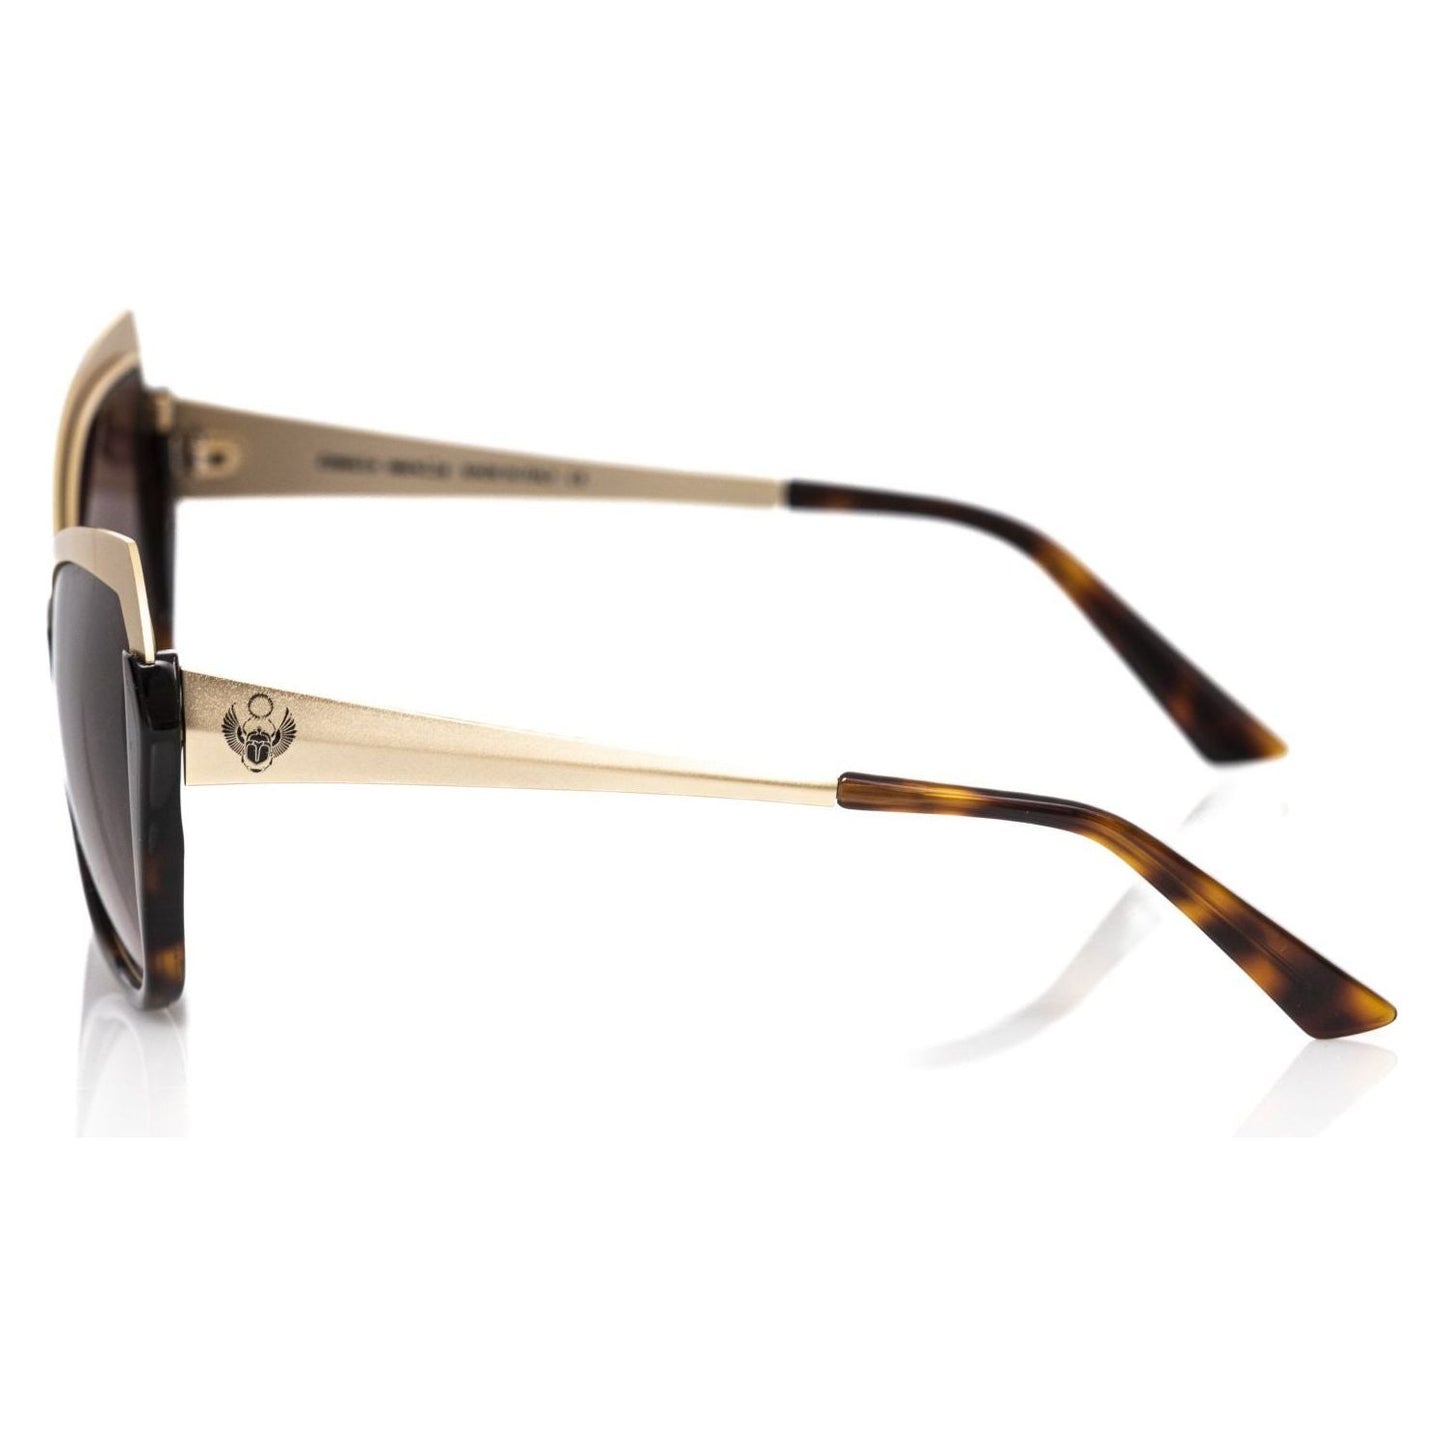 Chic Cat Eye Sunglasses with Gold Accents Frankie Morello